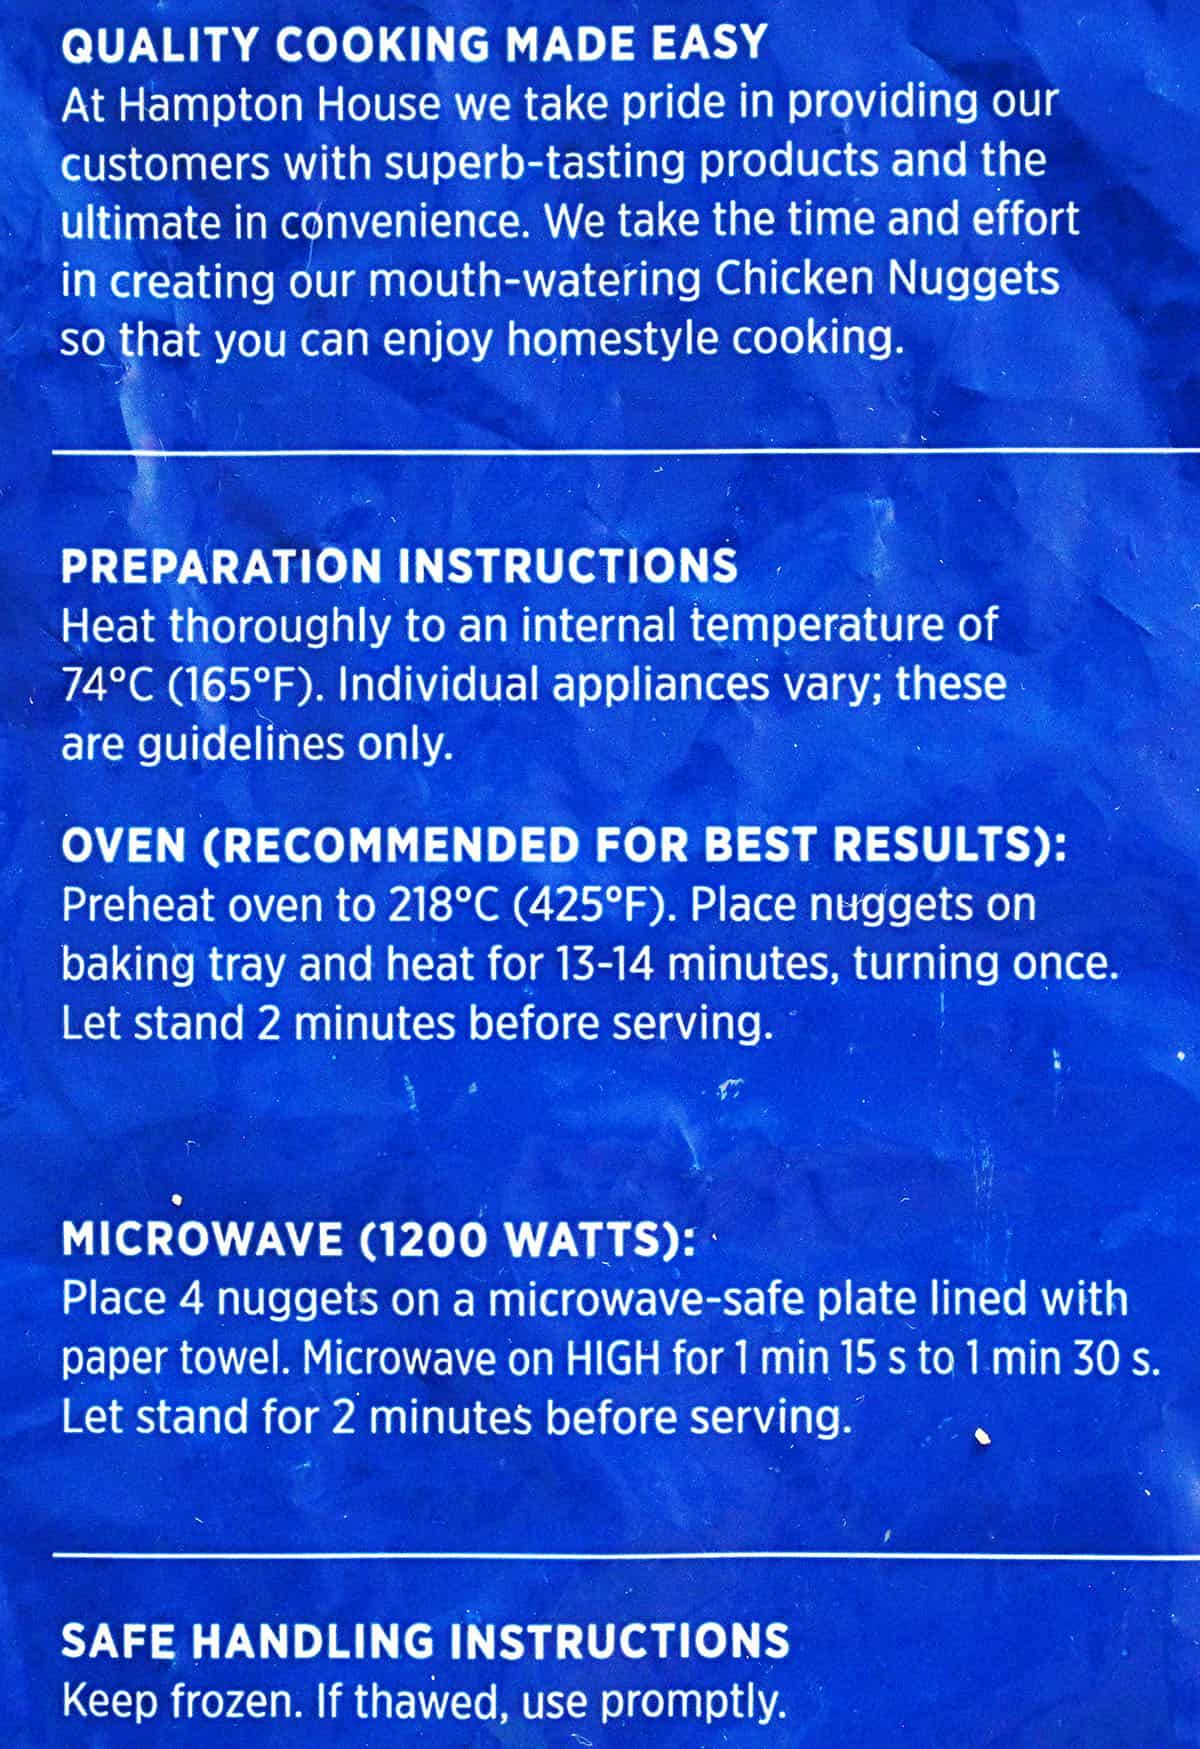 Preparation instructions for the chicken nuggets.